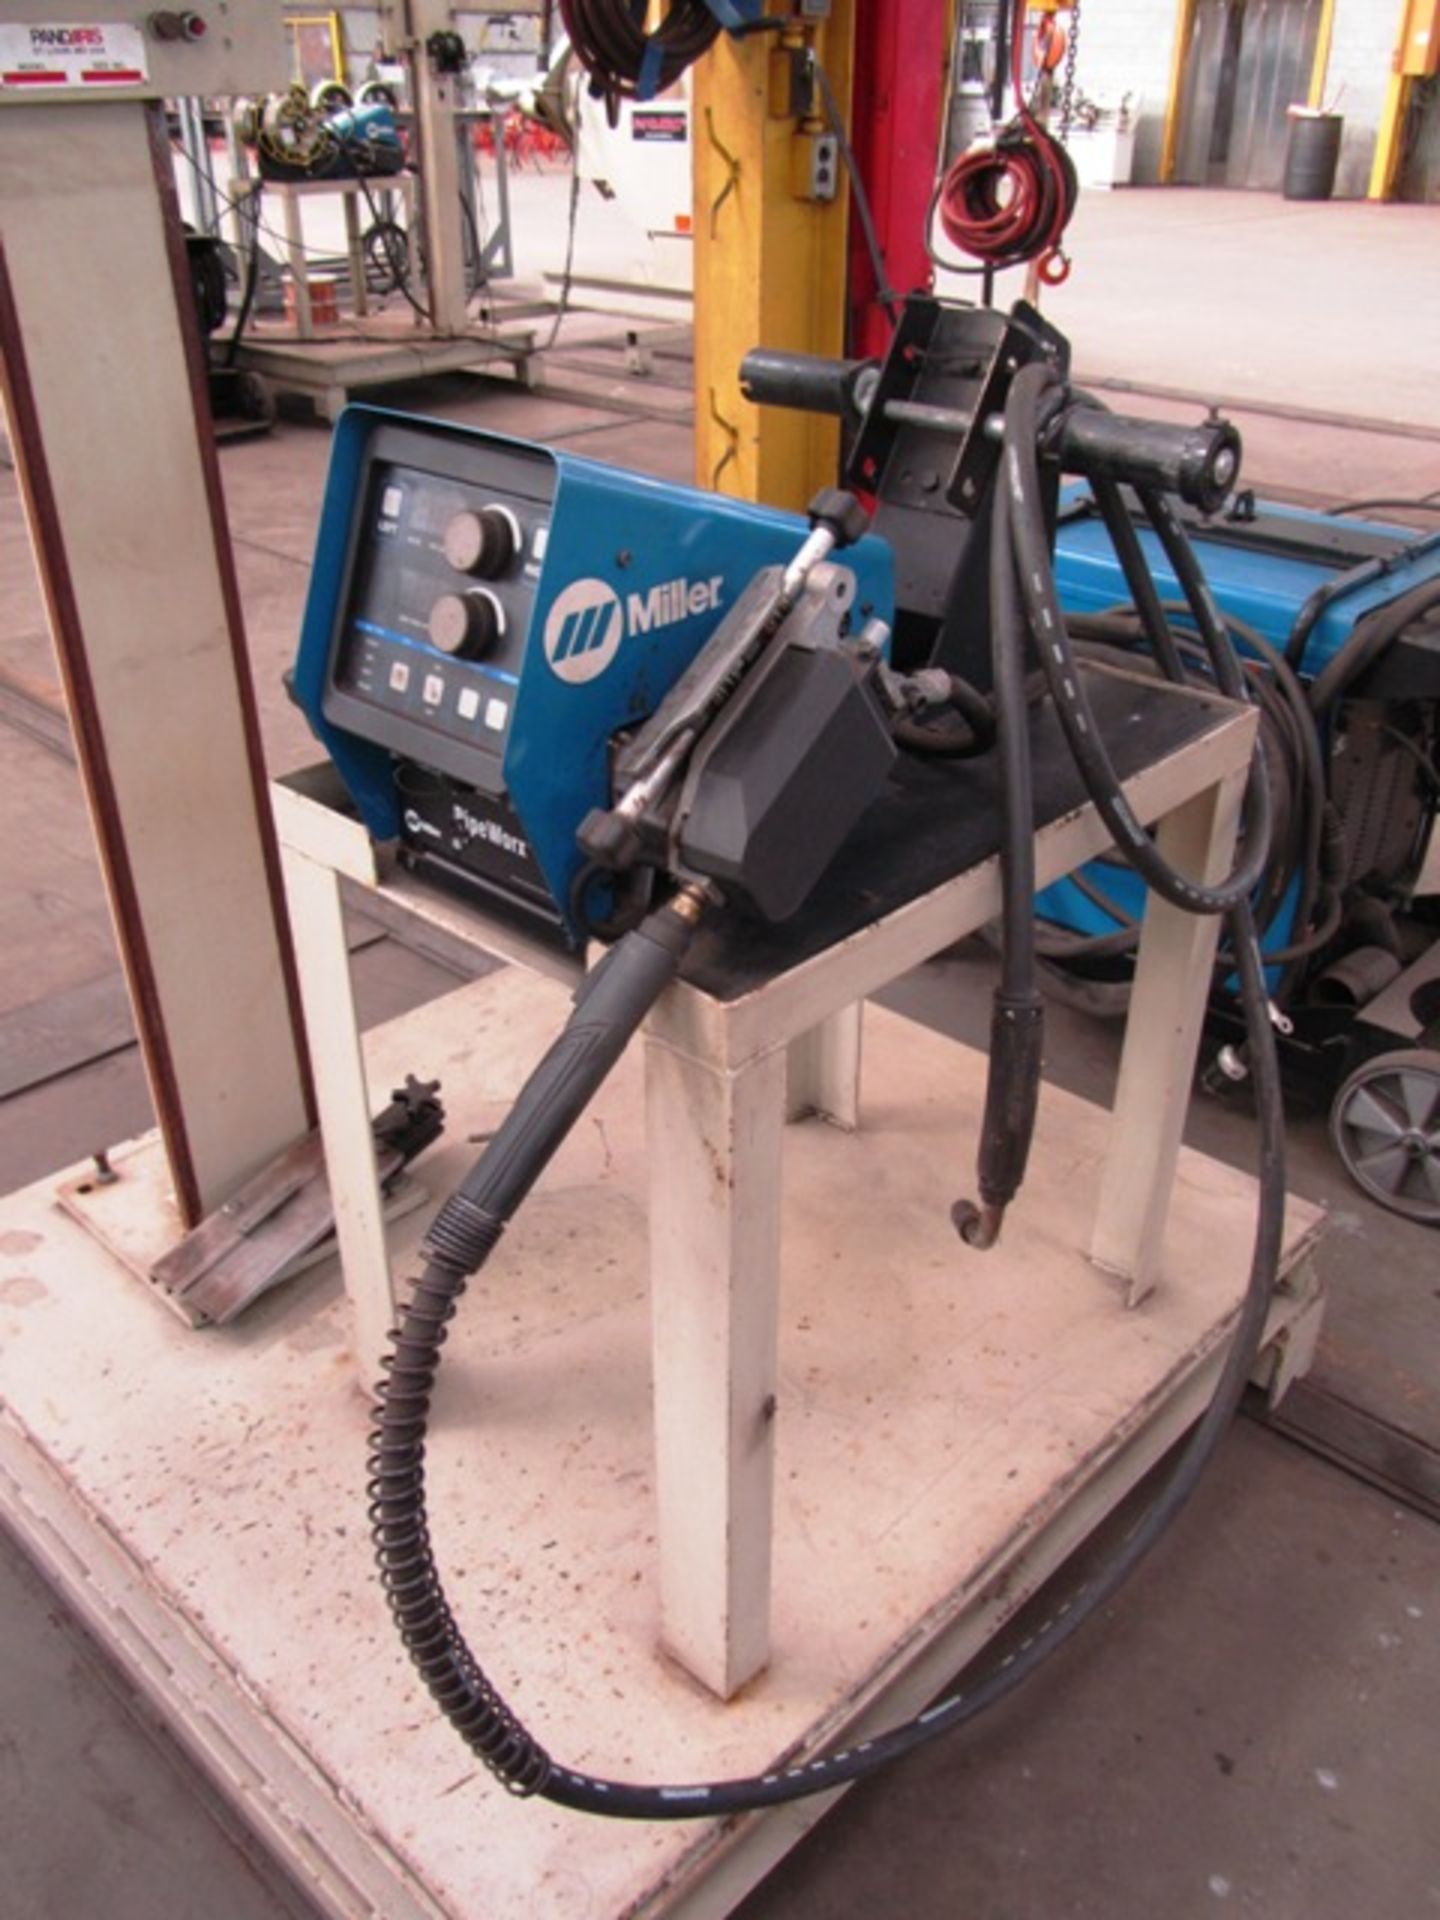 Miller PipeWorx 400 Portable Mig Welder with Miller PipeWorx Dual Wire Feeder, sn:MD130014G - Image 2 of 2